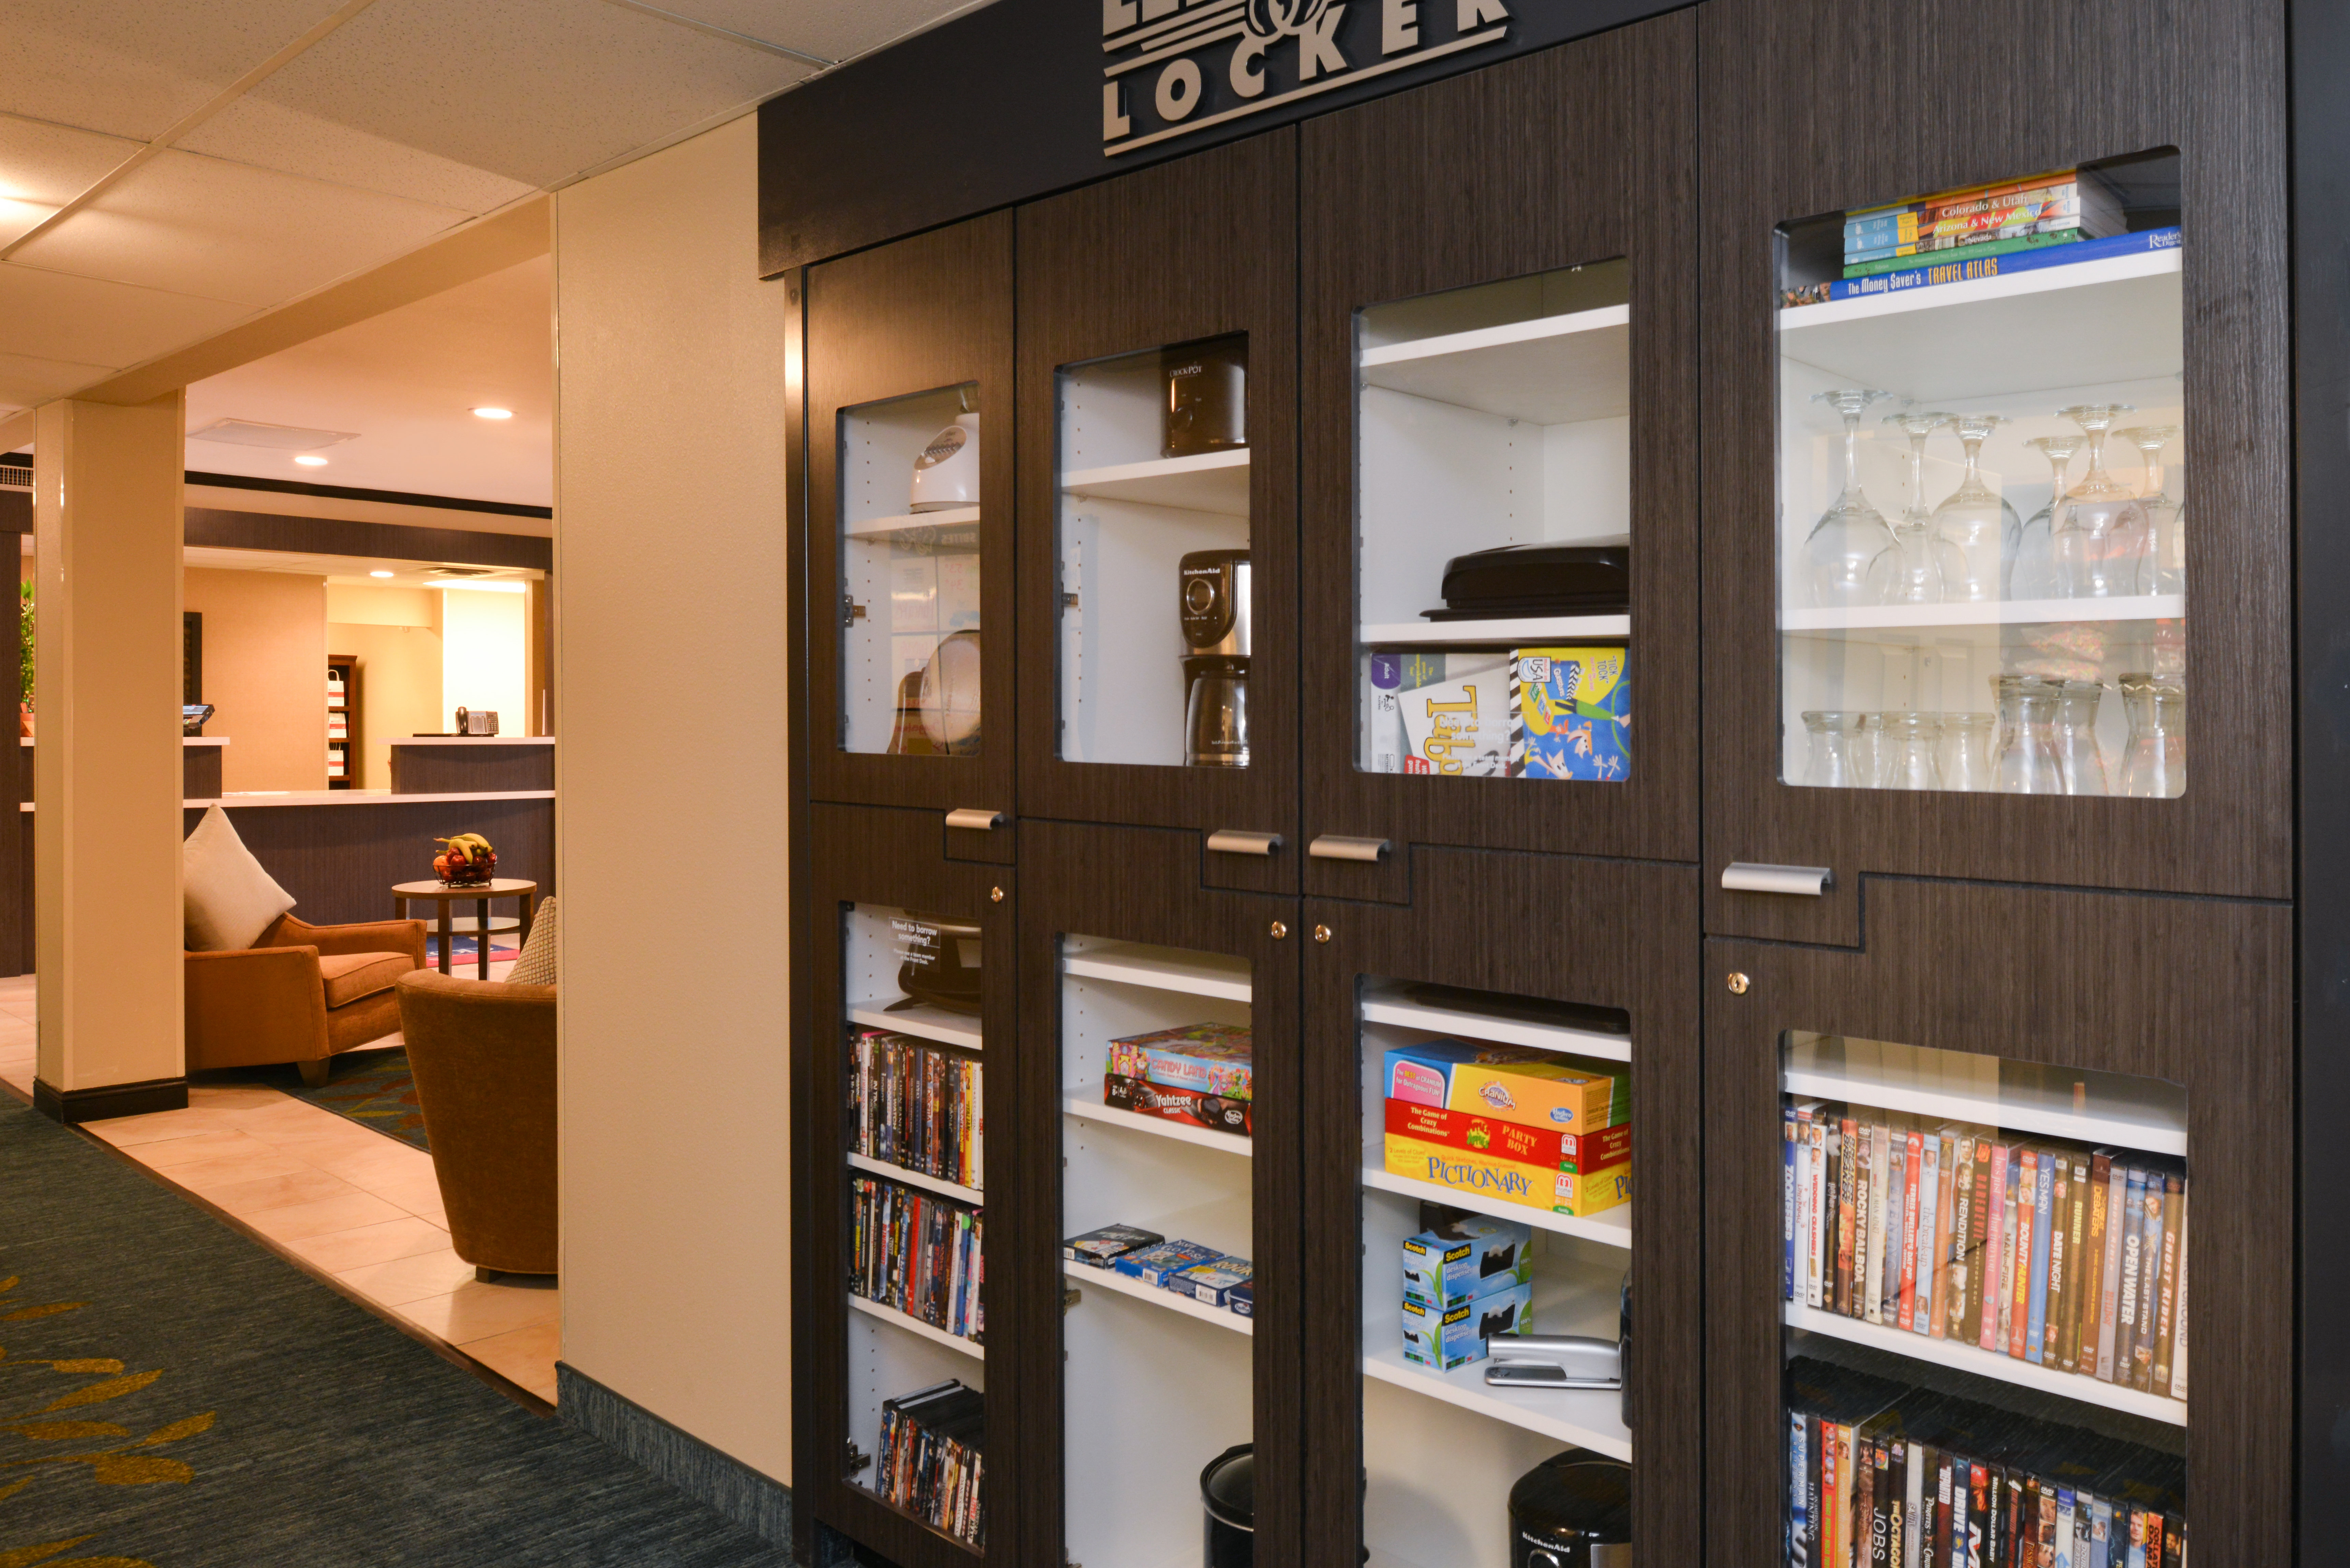 At the lending locker, guests can borrow games, movies, and more!